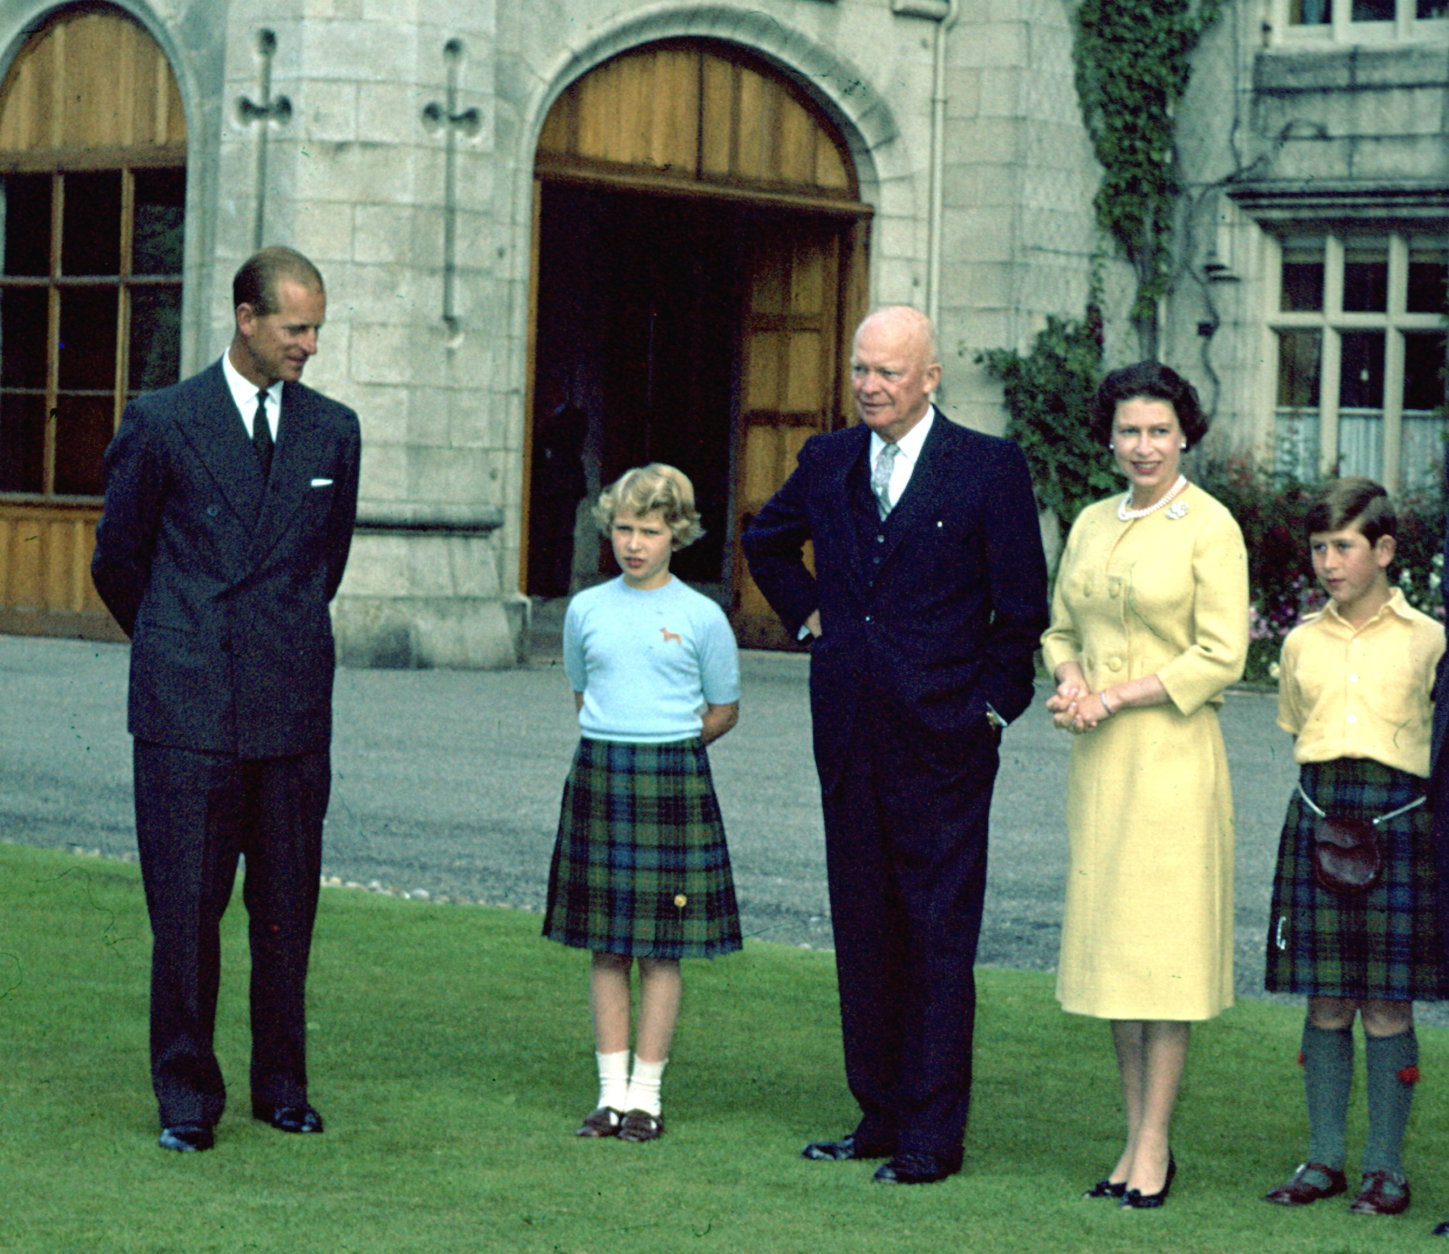 Britain's Queen Elizabeth II stands in the grounds of Balmoral Castle, Scotland, with U.S. President Eisenhower, Aug. 29, 1959. From left to right, Prince Philip, Princess Anne, President Eisenhower, Queen Elizabeth II and Prince Charles. (AP Photo).